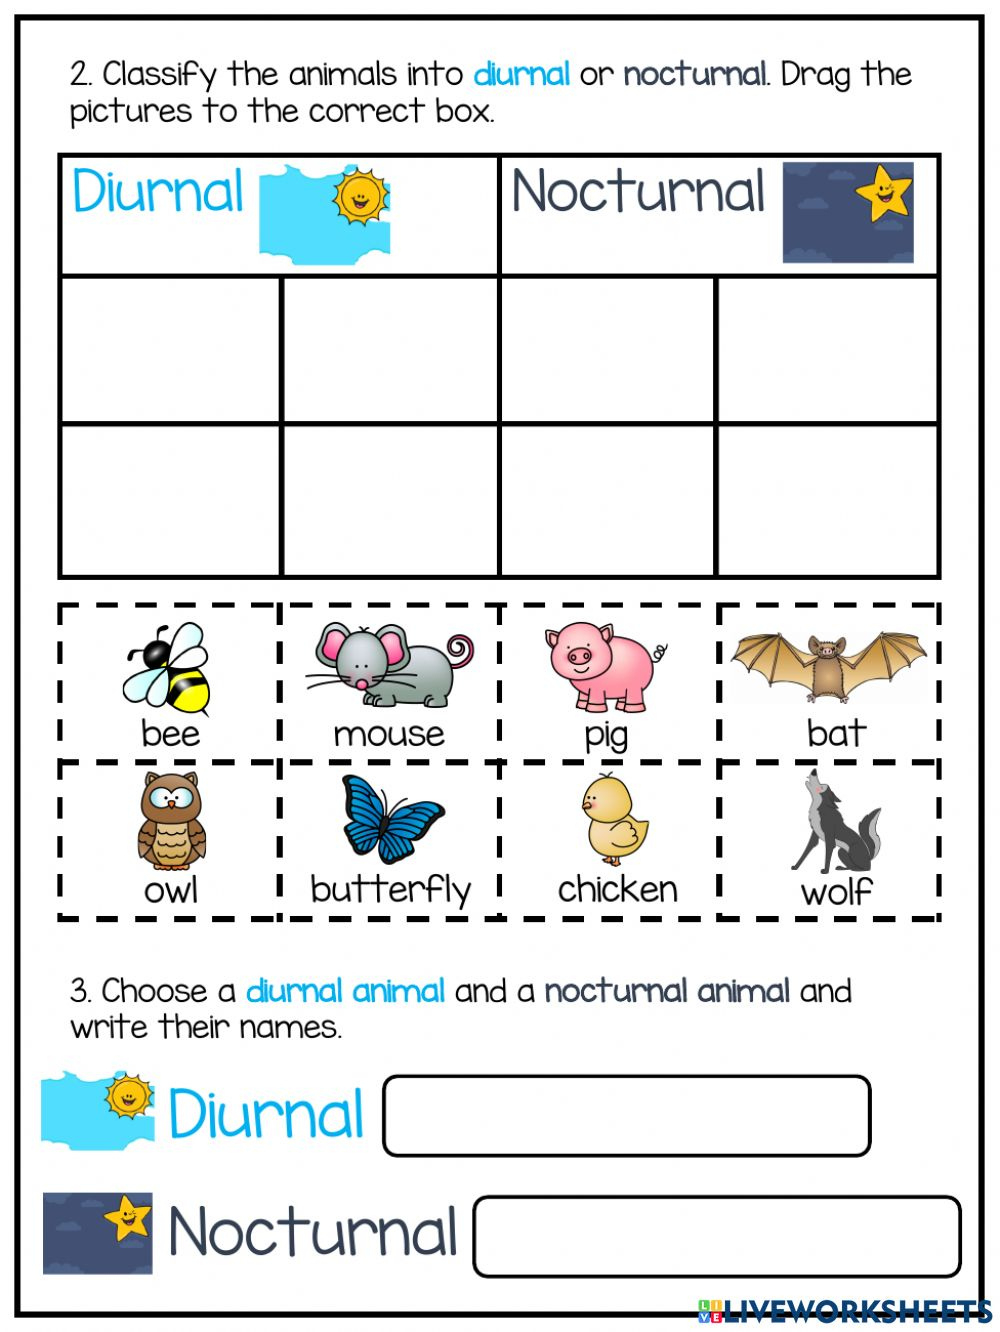 Day And Night Diurnal And Nocturnal Animals Worksheet